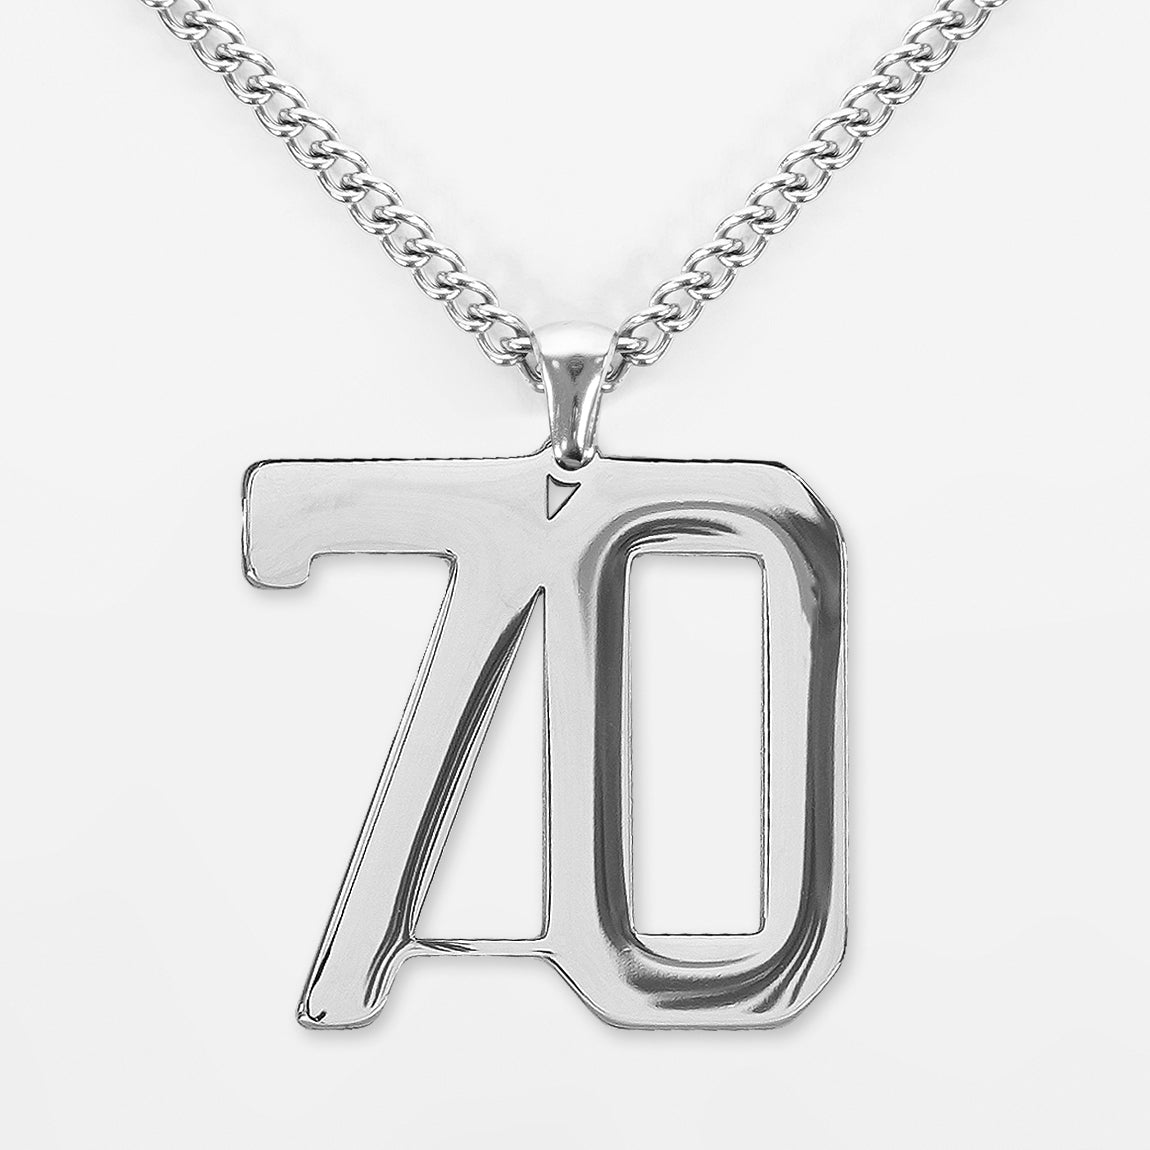 70 Number Pendant with Chain Necklace - Stainless Steel